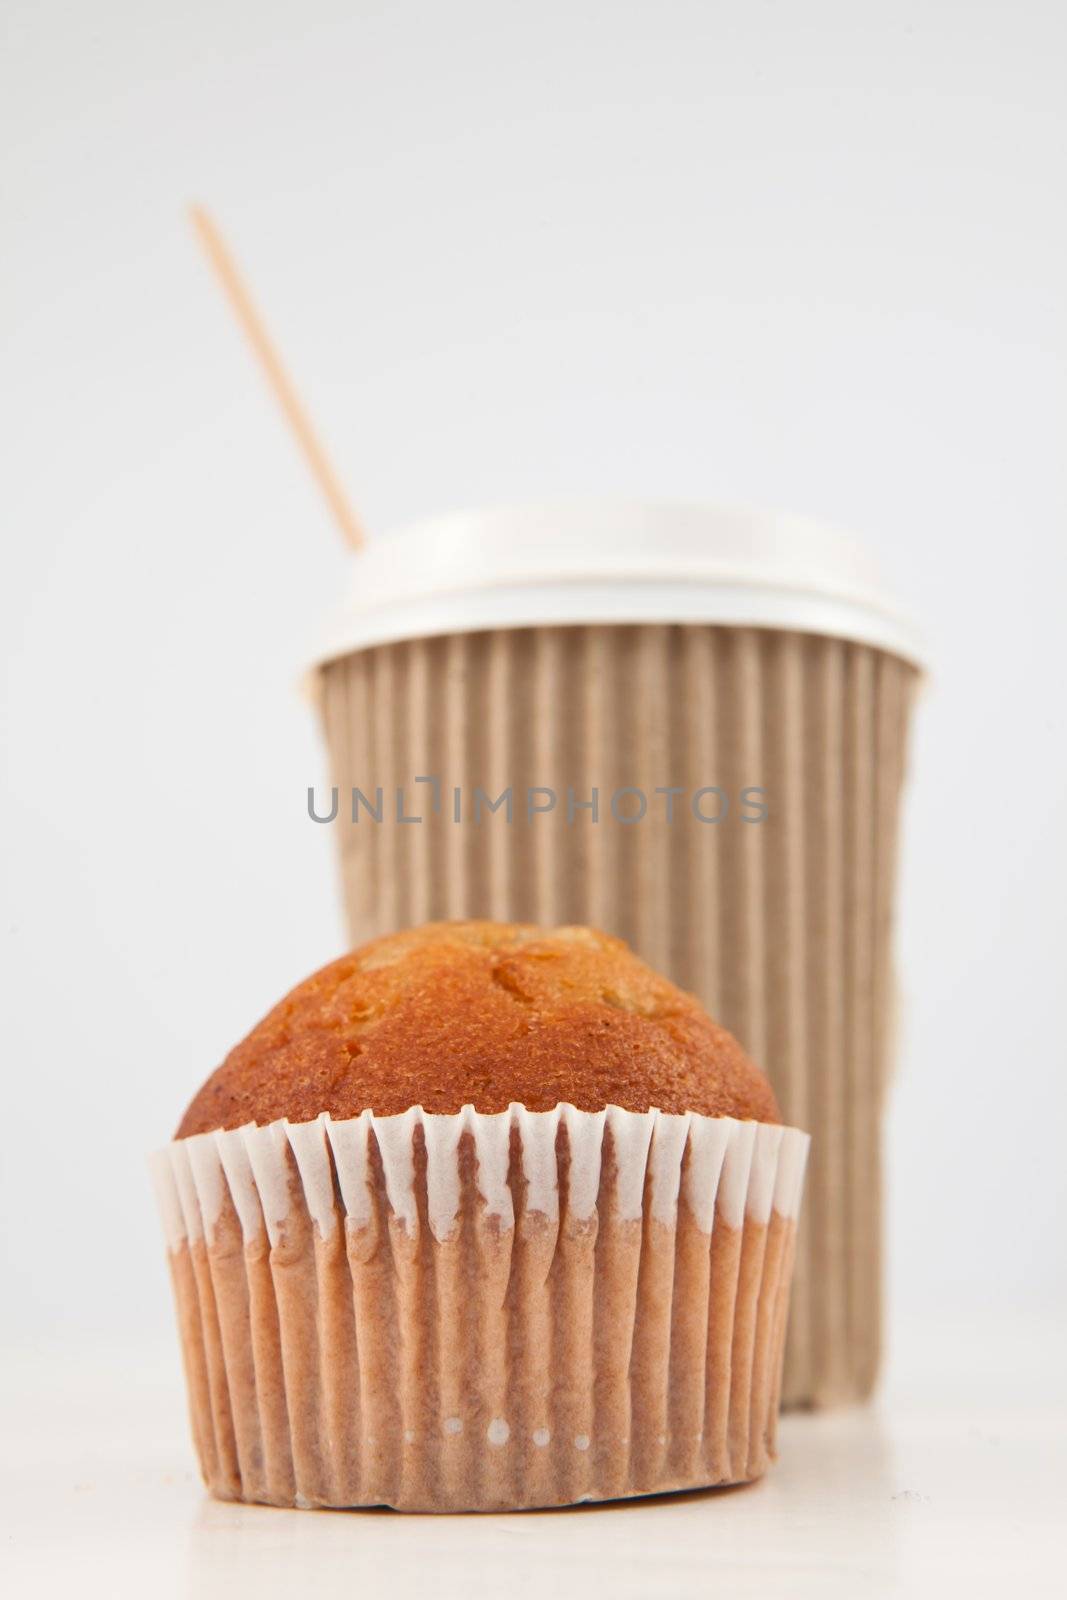 Muffin and cup of tea placed together against white back ground